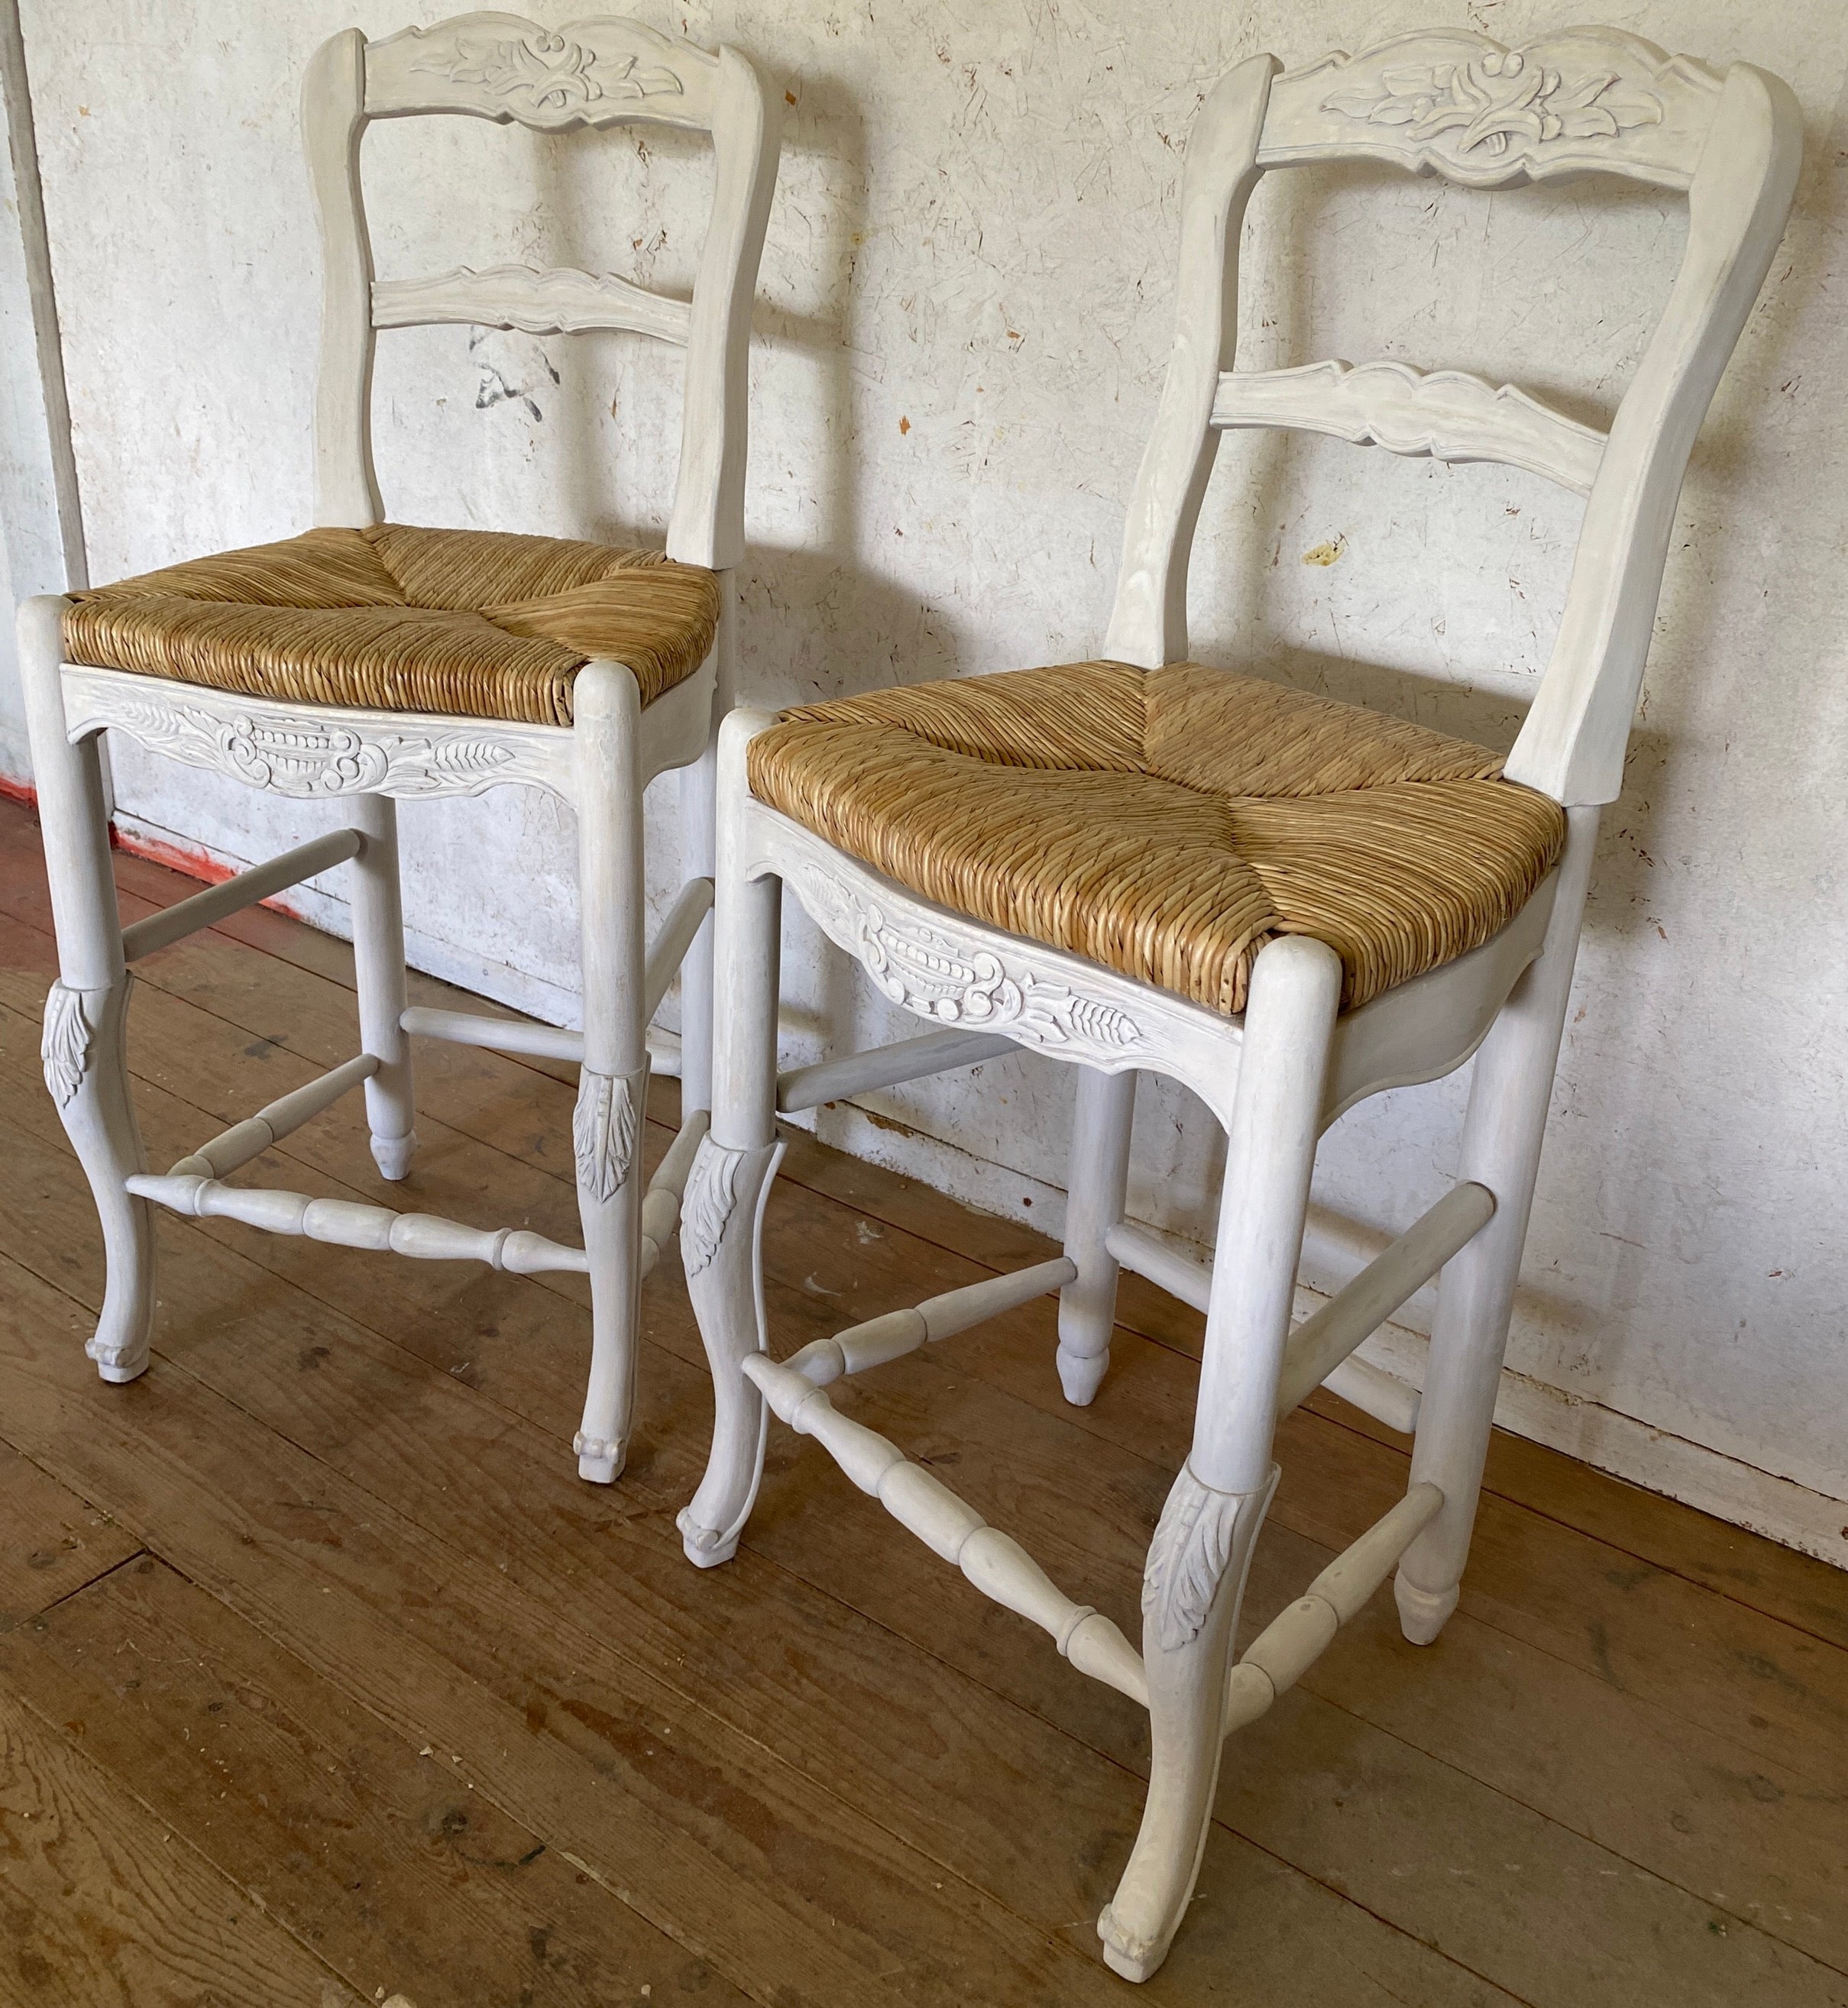 Pair of French Louis XV Provincial style carved wooden bar stools with rushed seats and cabriole style front legs.